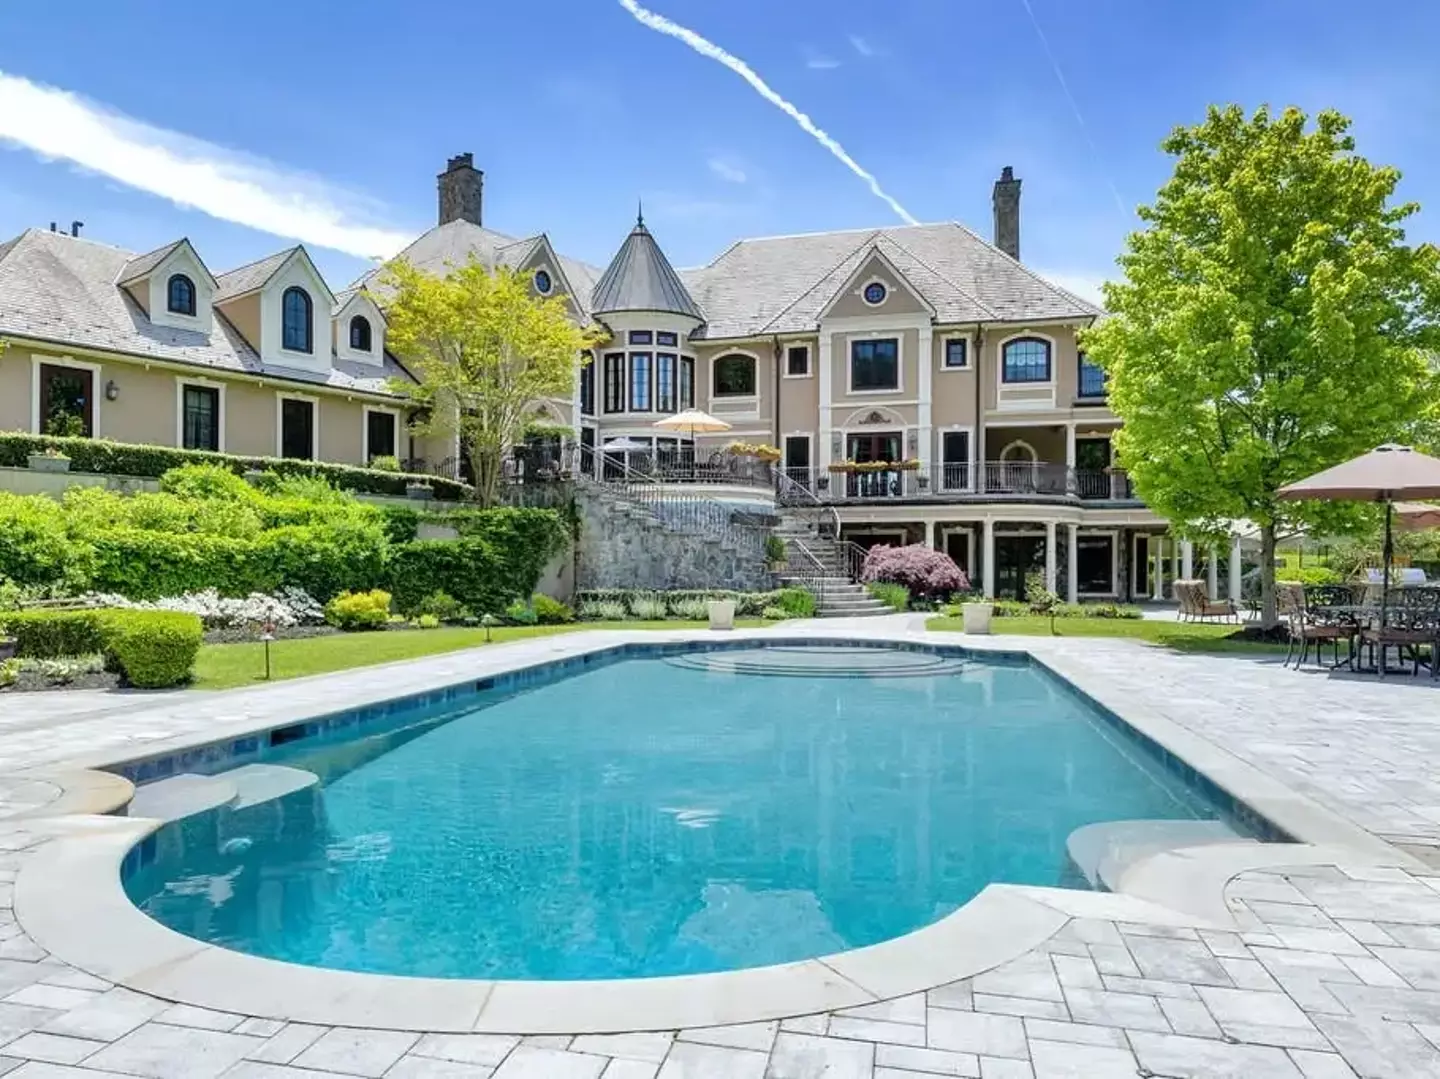 The Long Island mansion has been likened to a 'French chateau'.